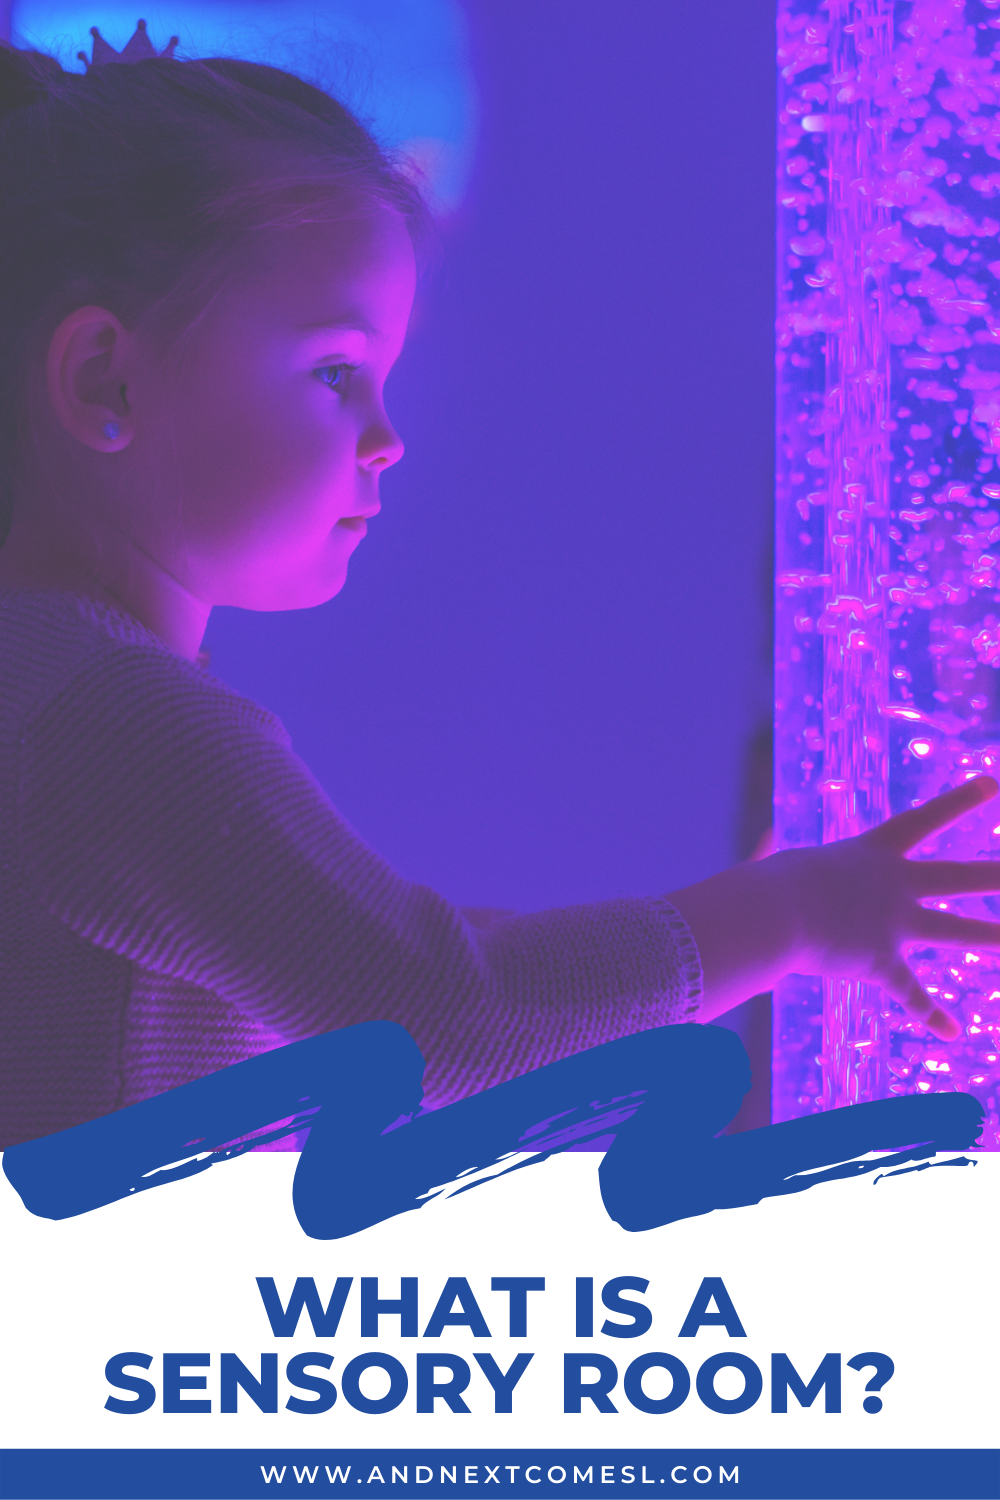 What is a sensory room? A look at what sensory rooms are, what they're used for, their history, and more!